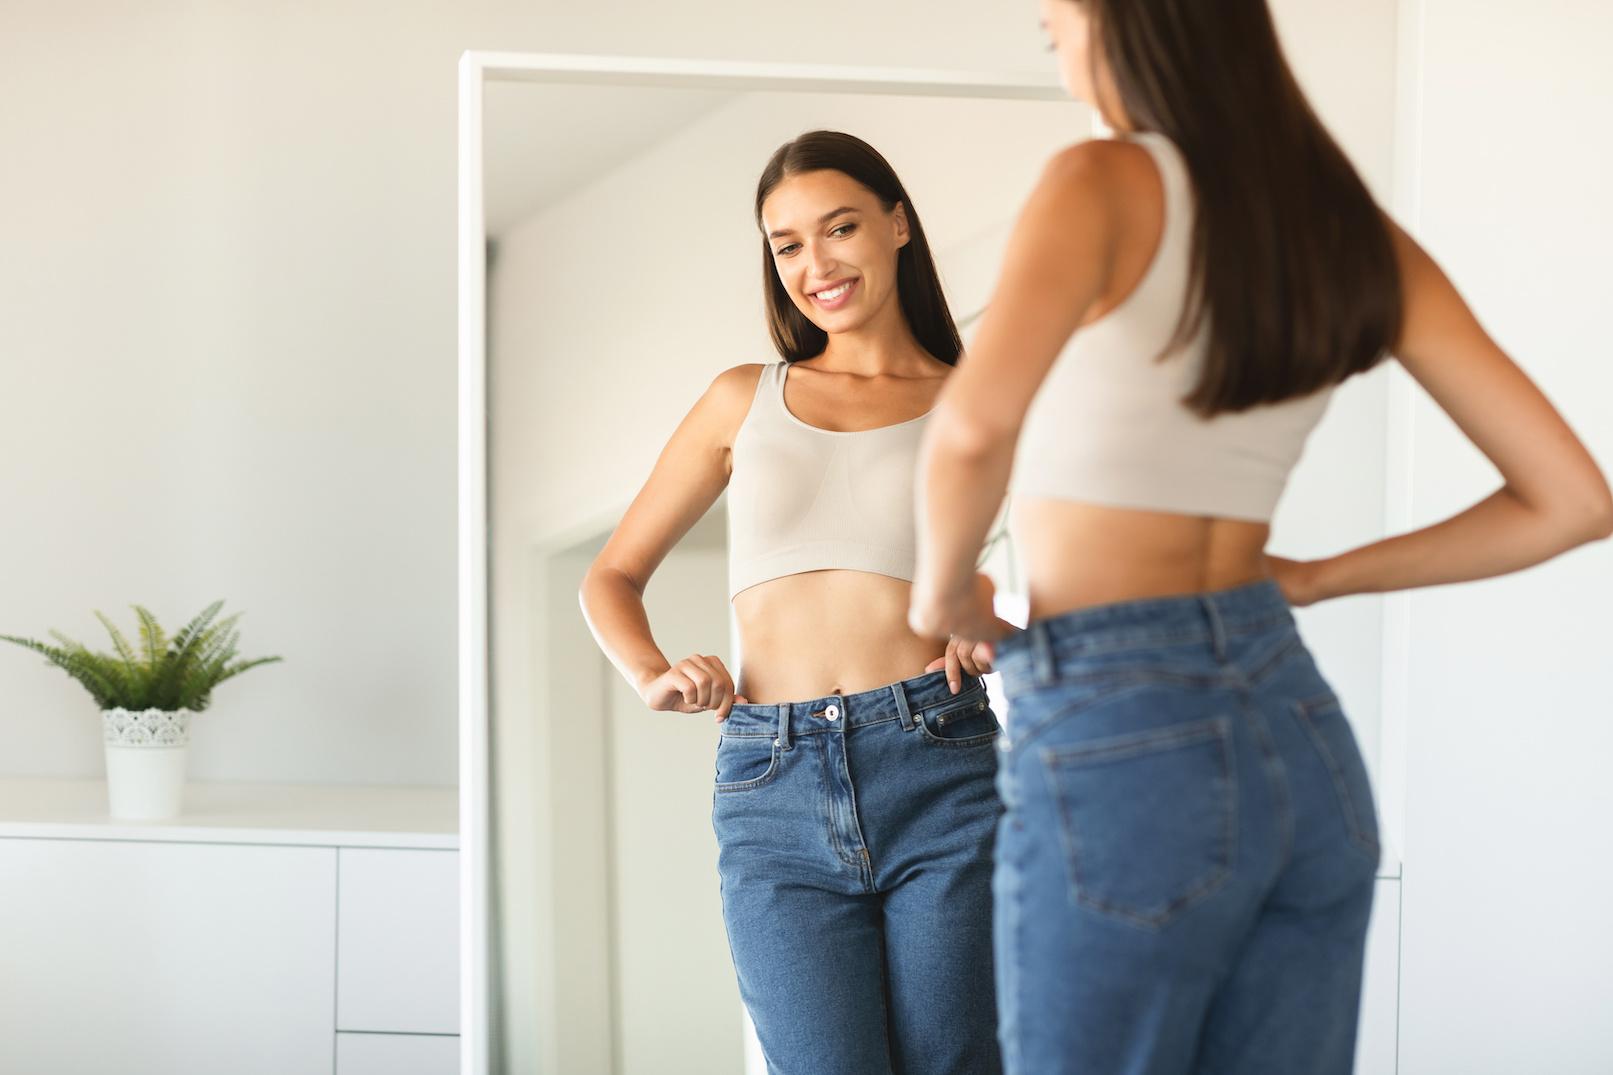 Cheerful young woman posing wearing jeans and smiling to her reflection in mirror after successful weight loss